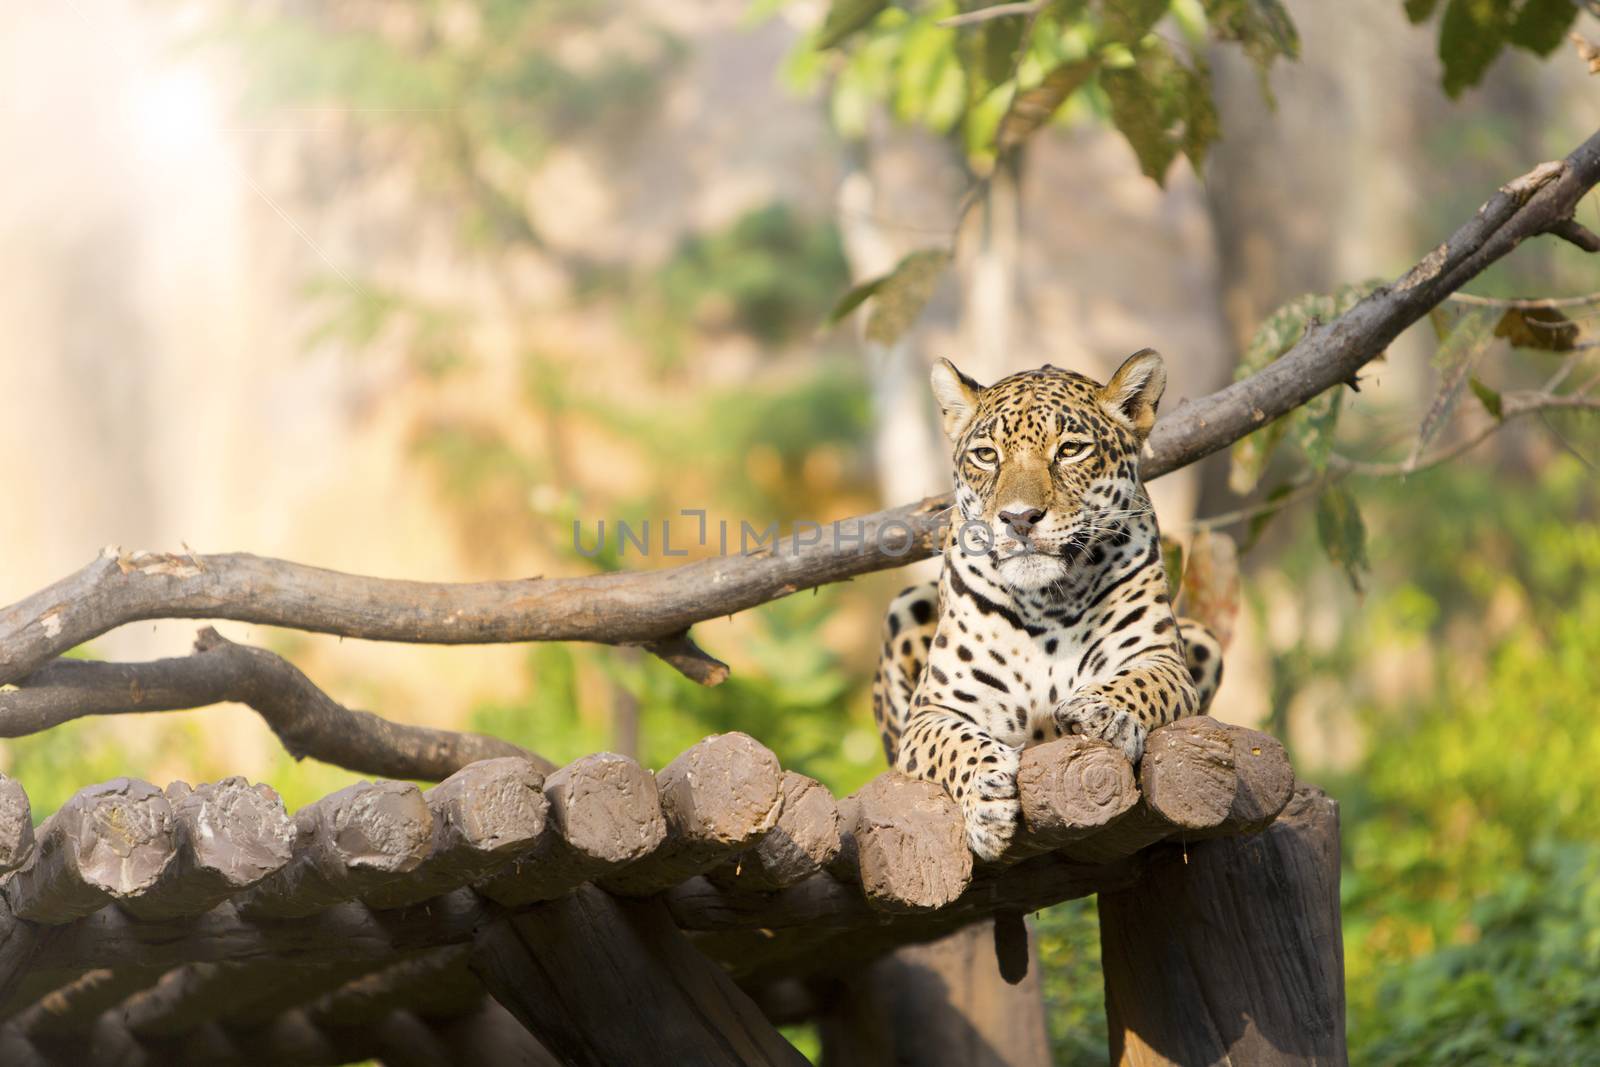 Tiger leopard on wood resting in the zoo. by jayzynism